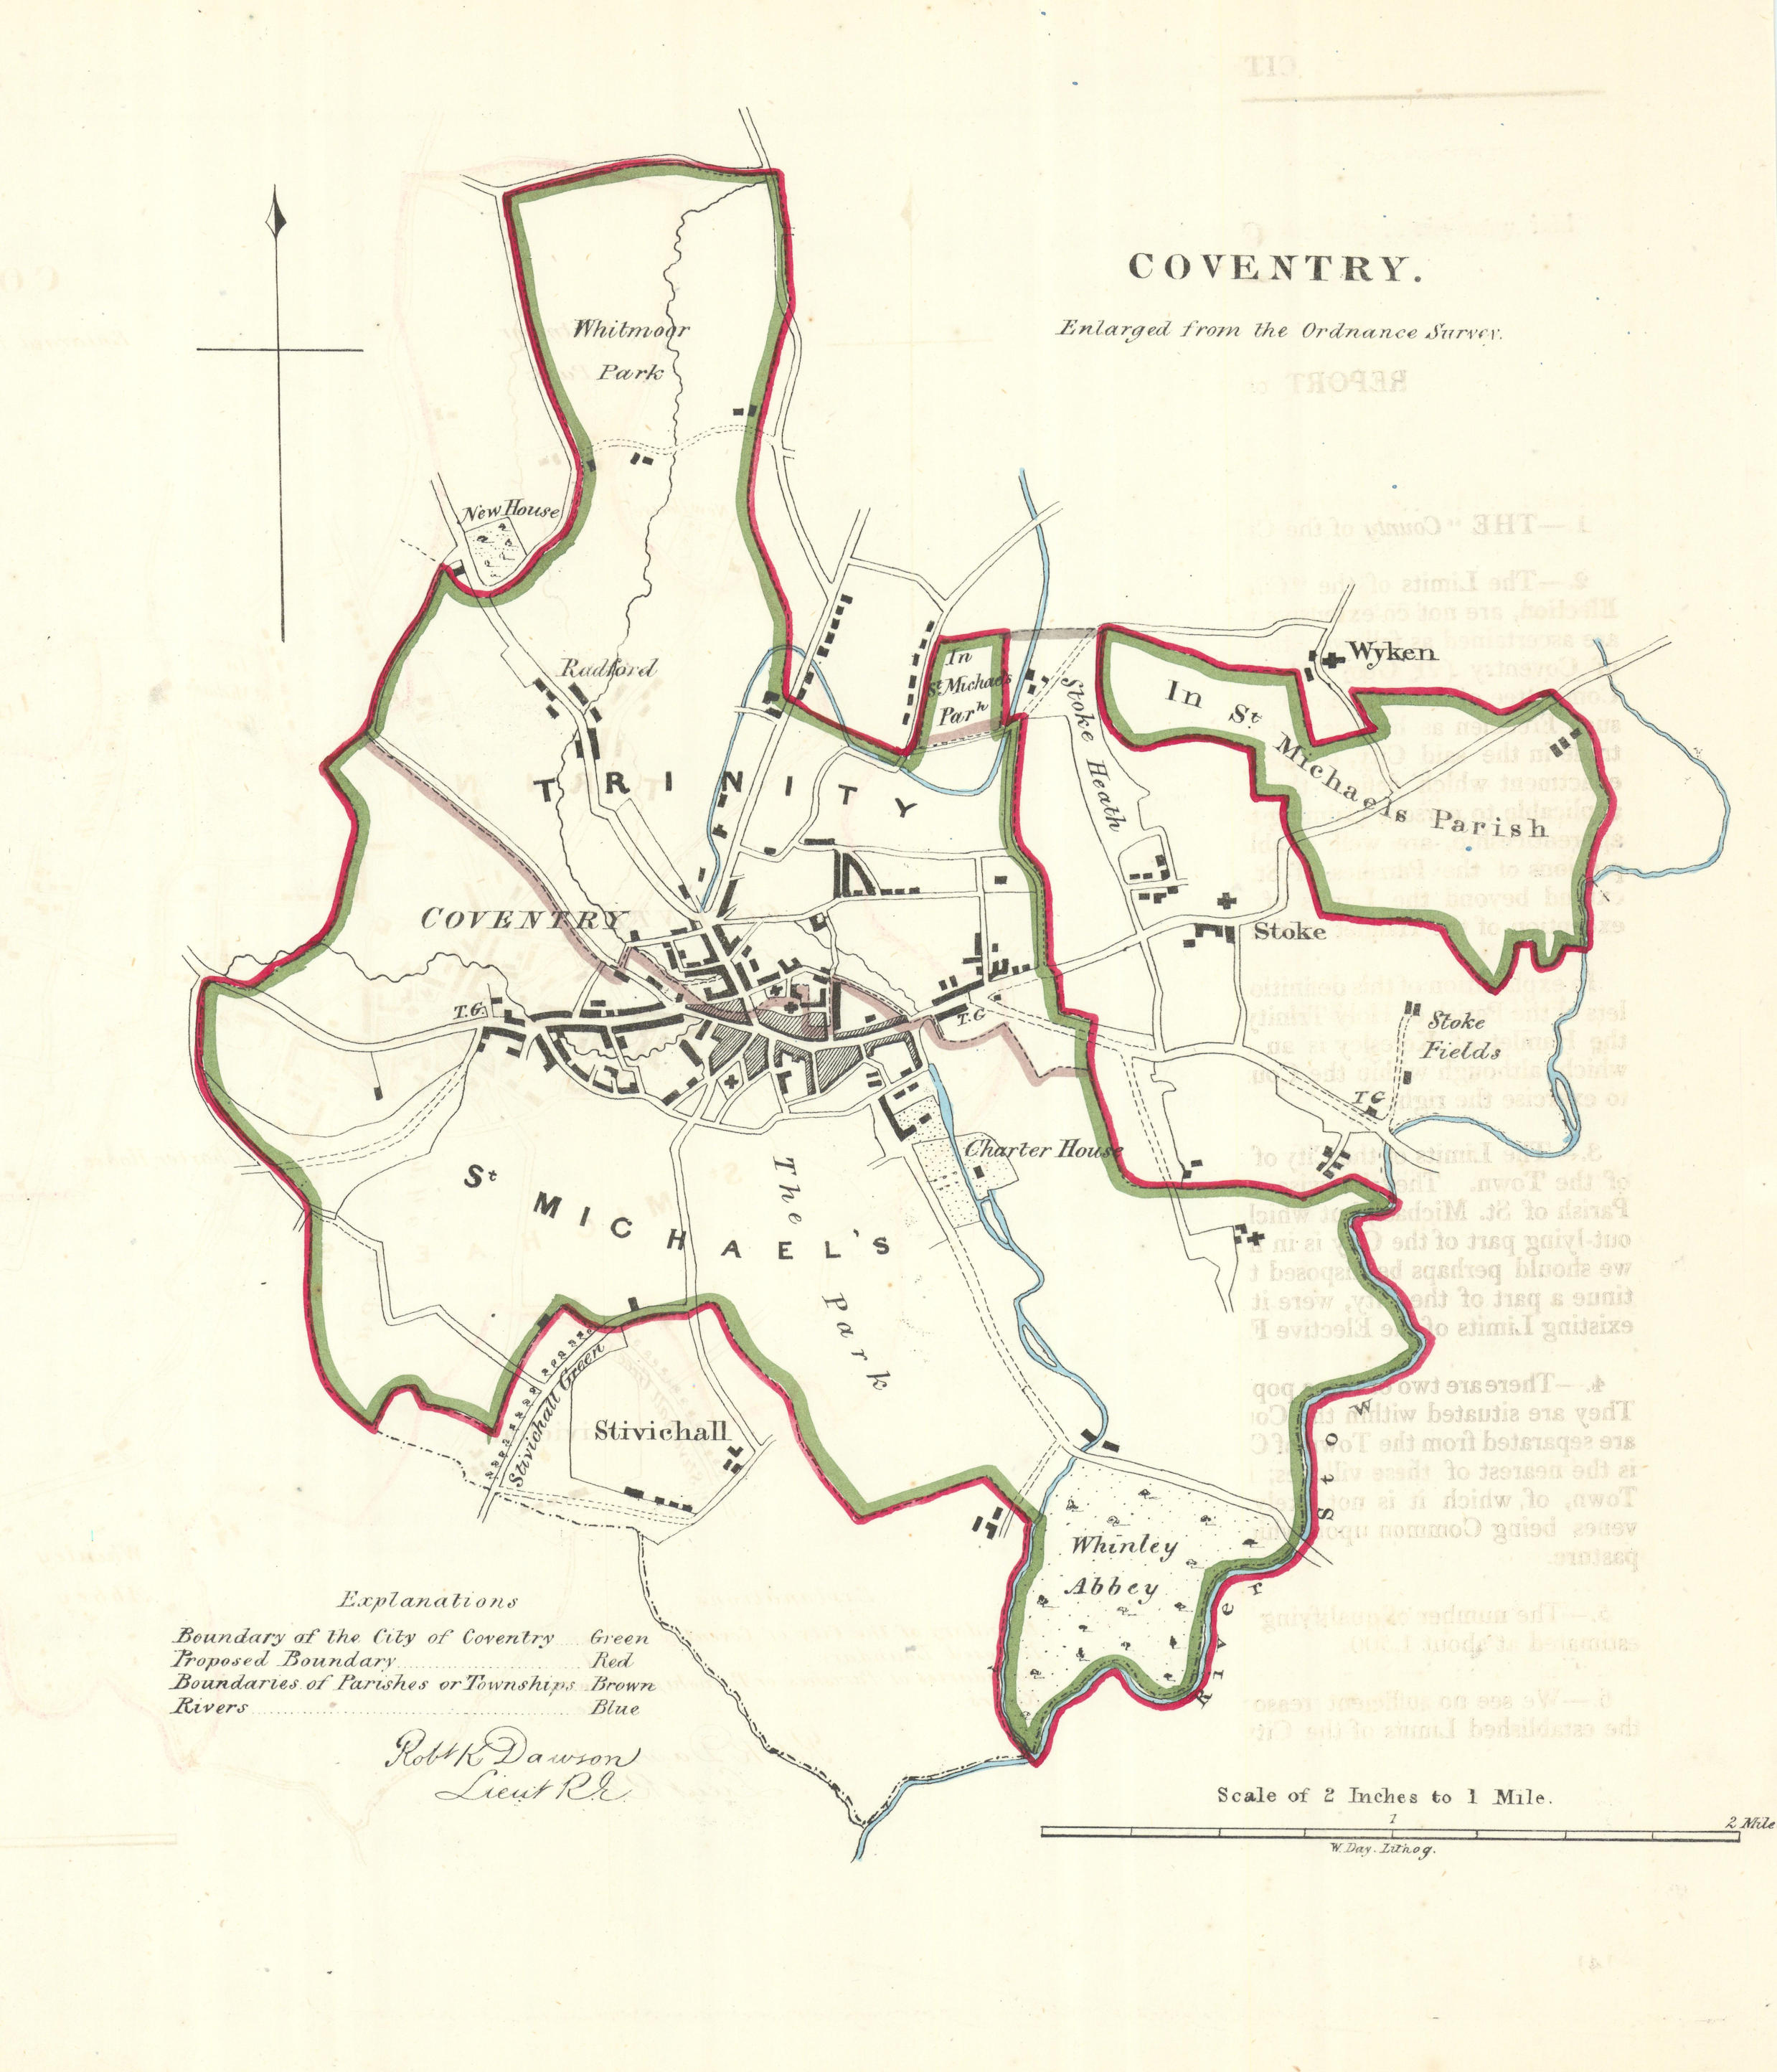 Associate Product COVENTRY borough/town/city plan. REFORM ACT. DAWSON 1832 old antique map chart